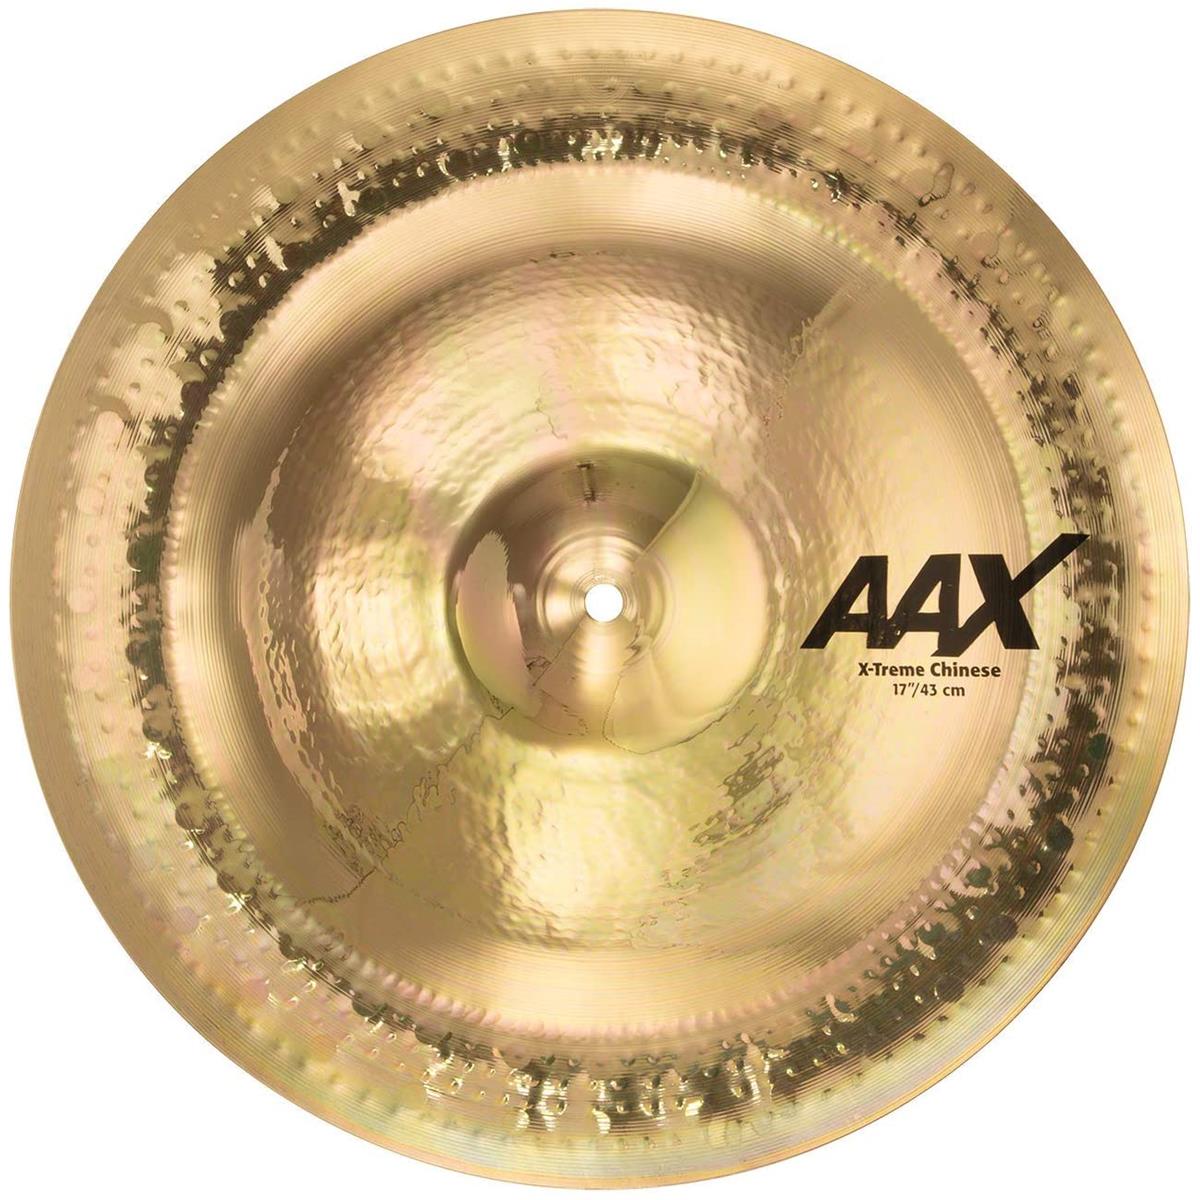 Sabian 17" AAX X-Treme Chinese Cymbal, Thin, Brilliant Finish An extremely fast and open attack, raw and ripping sound, and punch power with rapid decay make the SABIAN 17" AAX X-Treme Chinese the ideal choice to cut through any band at any volume. Sure, the band may hate you, but you know a good Tg when you hear it! The SABIAN AAX series delivers consistently bright, crisp, clear and cutting responses - AAX is the ultimate Modern Bright sound!